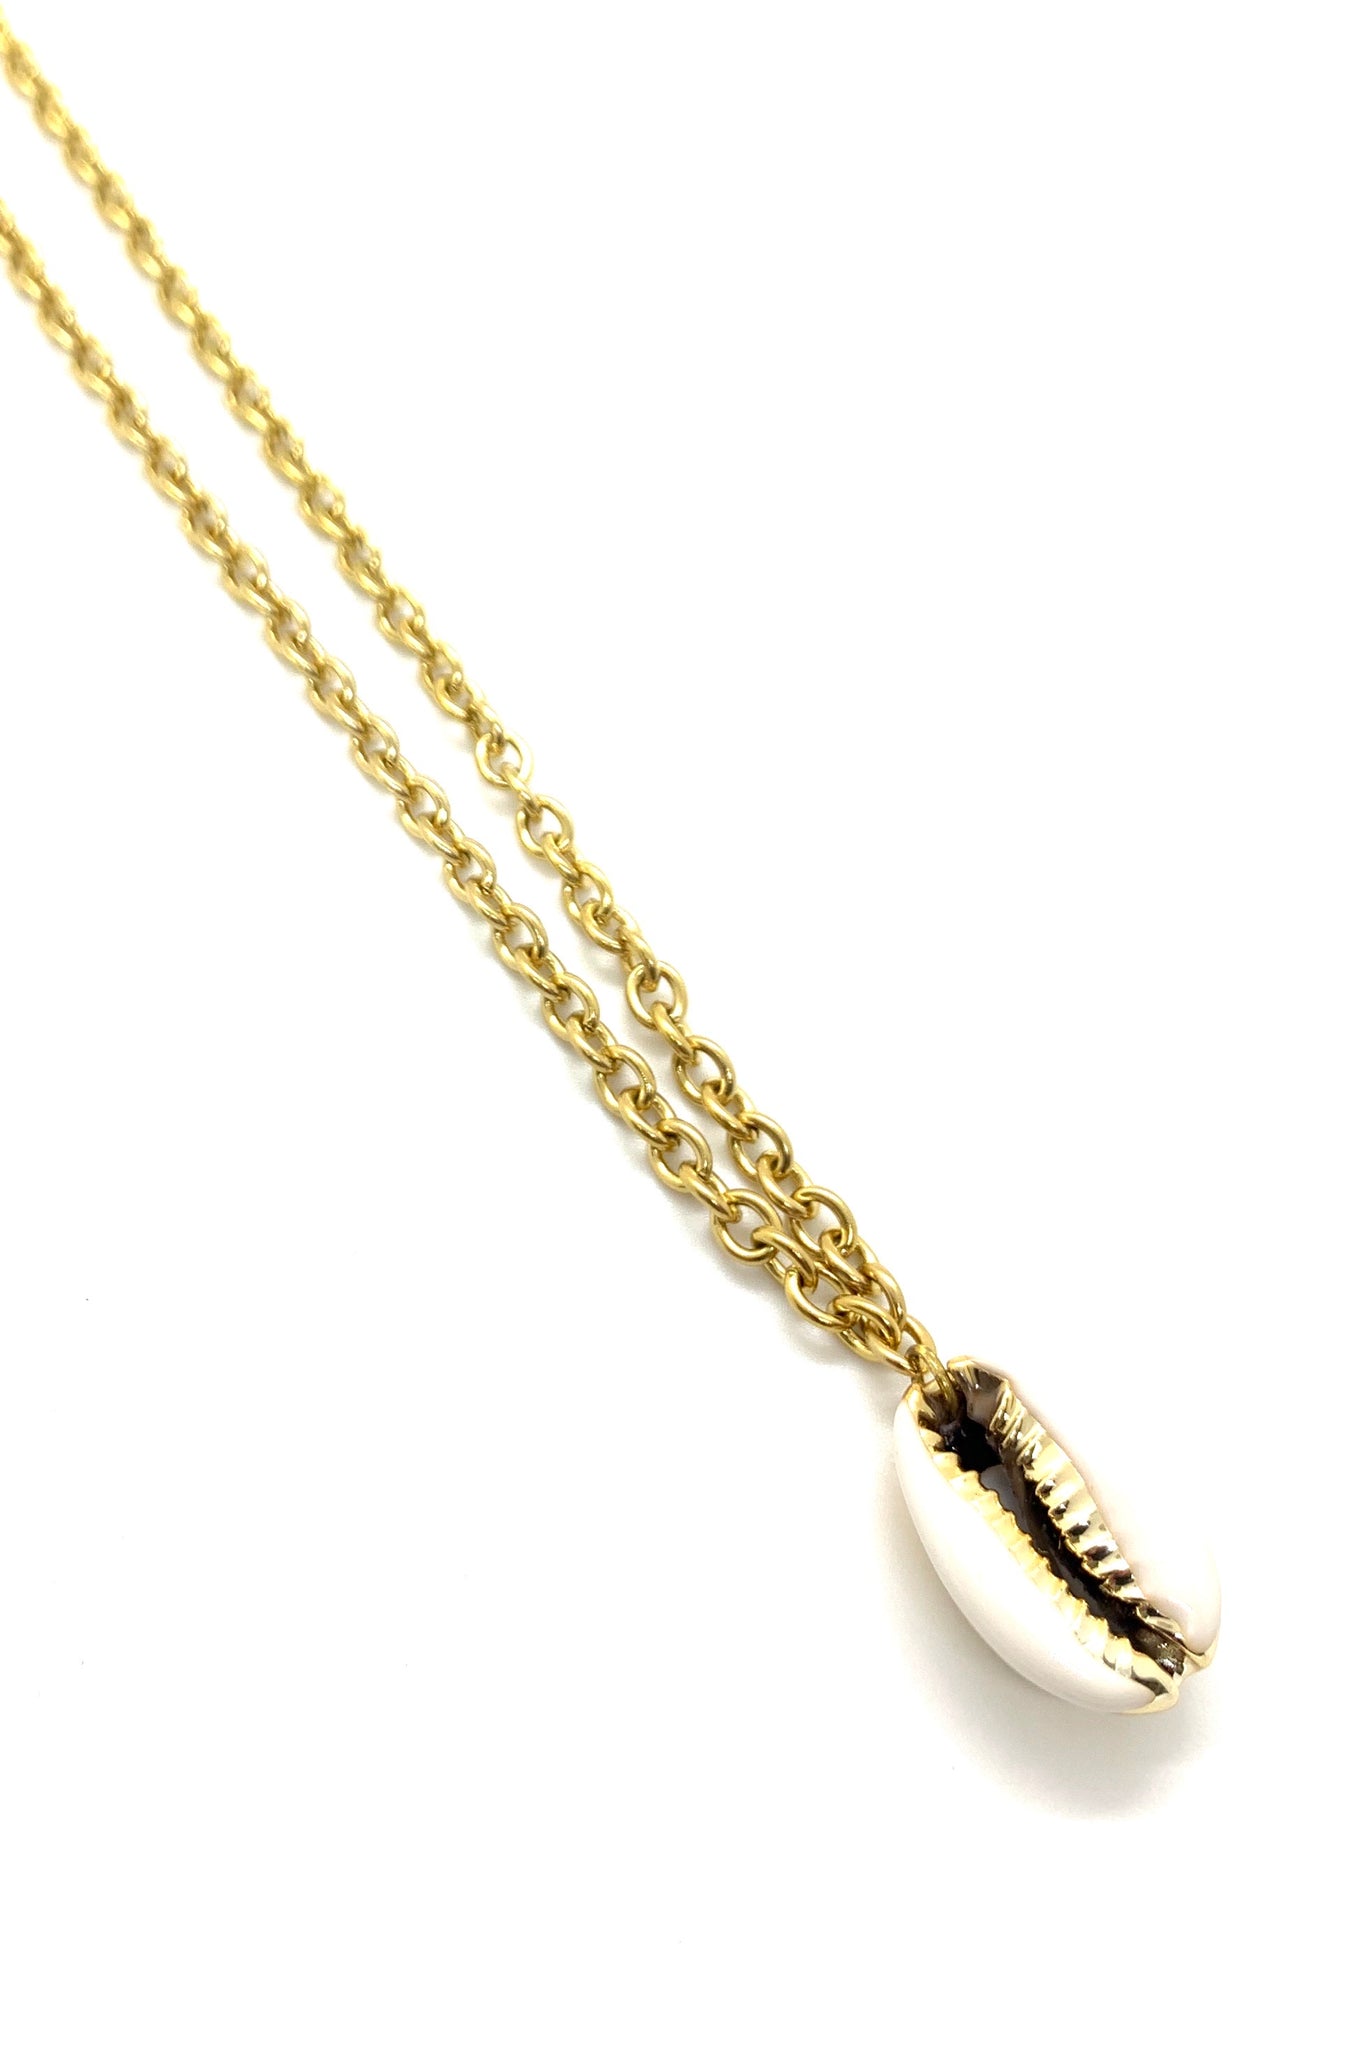 Medium long necklace white/gold shell